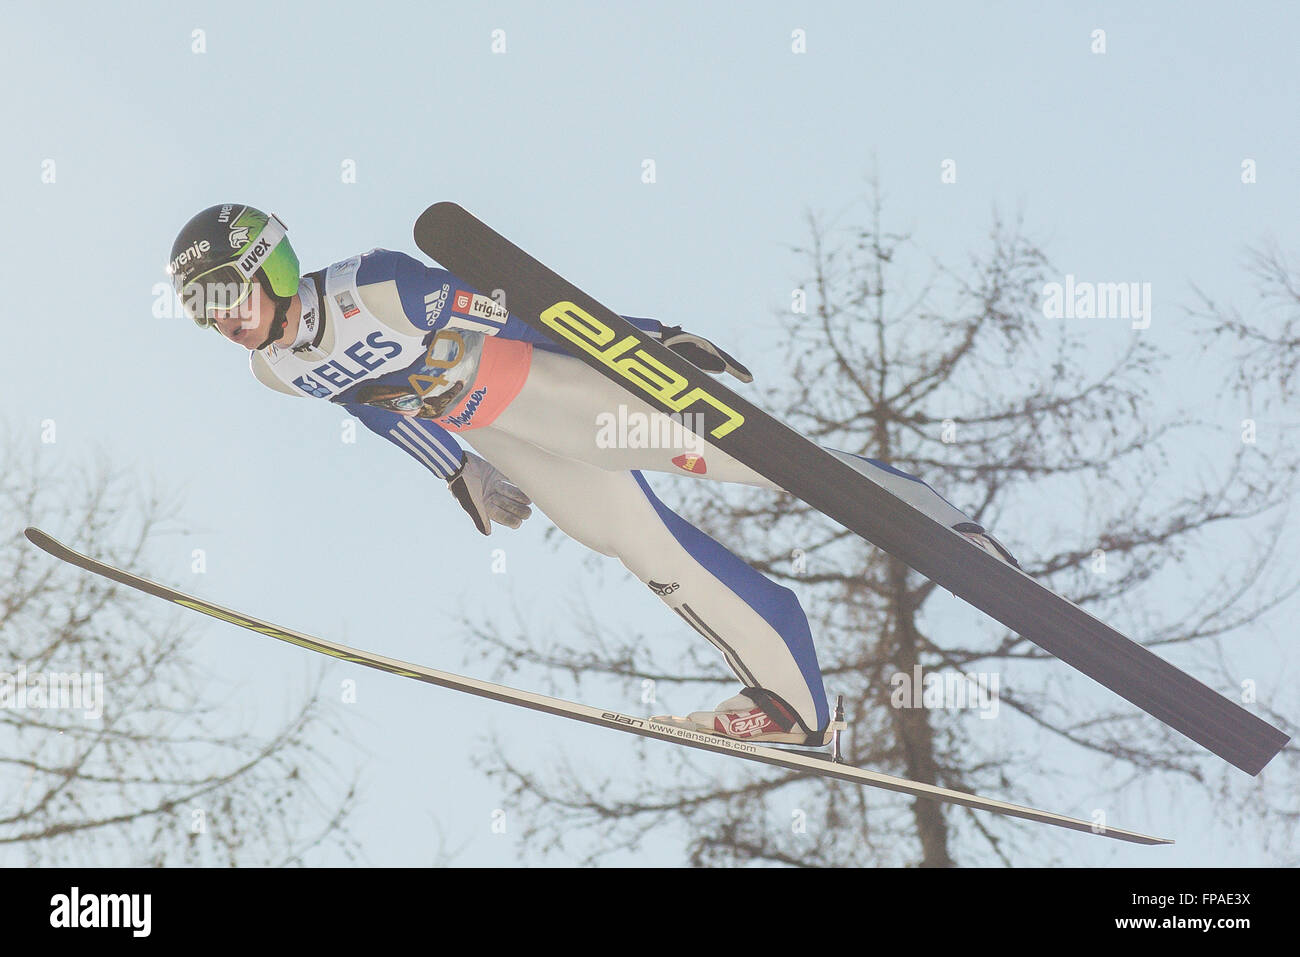 Planica, Slovenia. 18th Mar, 2016. Jaka Hvala of Slovenia competes during Planica FIS Ski Jumping World Cup finals on the March 18, 2016 in Planica, Slovenia. © Rok Rakun/Pacific Press/Alamy Live News Stock Photo